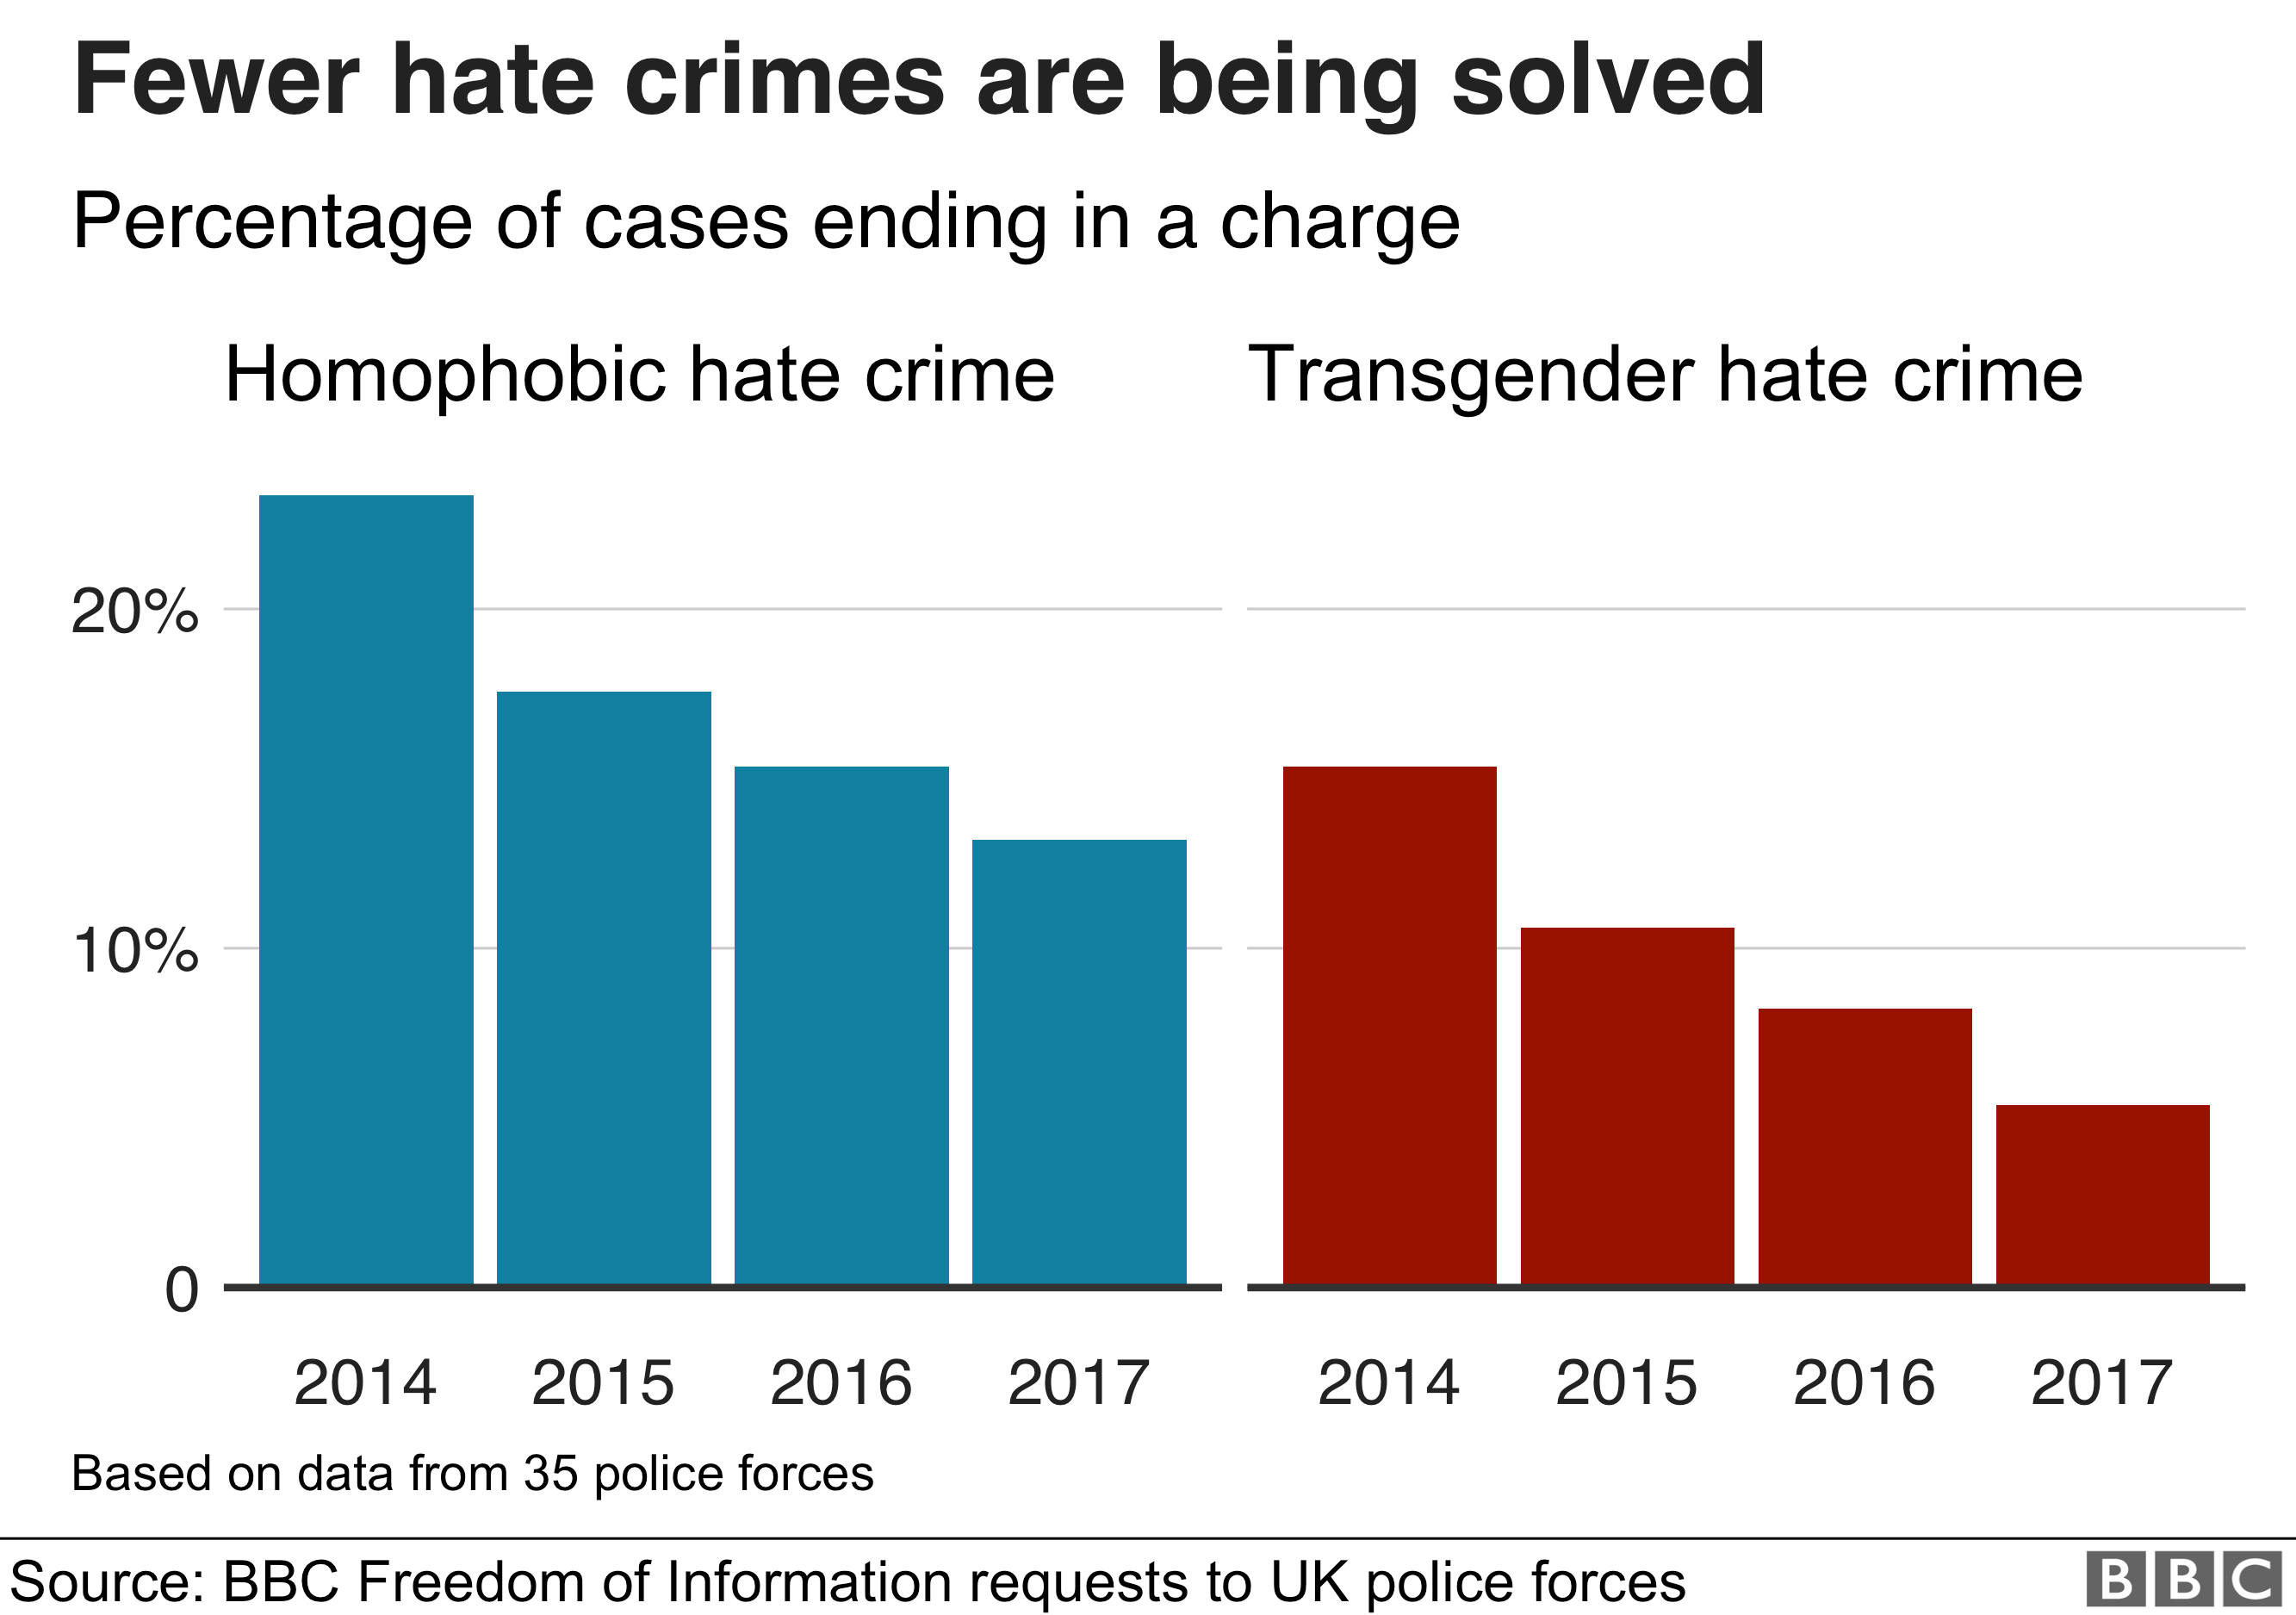 Fewer hate crimes are being solved. The percentage of both homophobic and transgender hate crimes are ending without anyone being charged